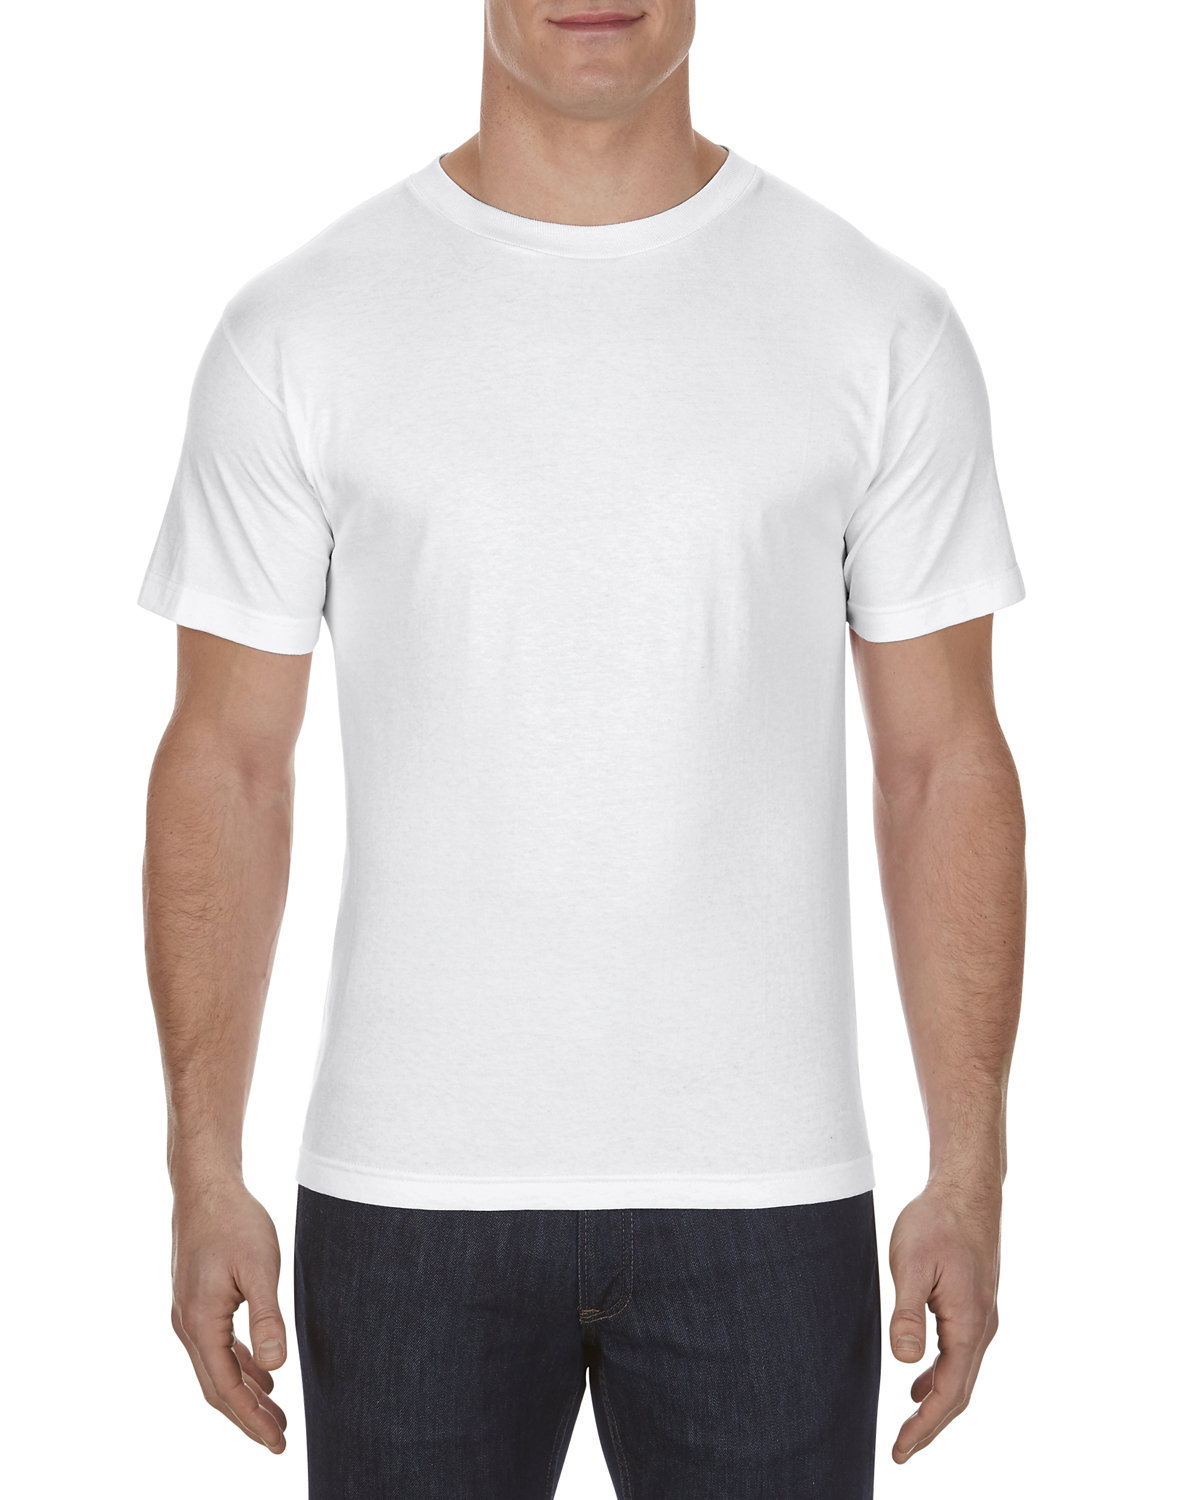 Unisex Heavyweight Cotton Tee - American Apparel 1301 – River Signs